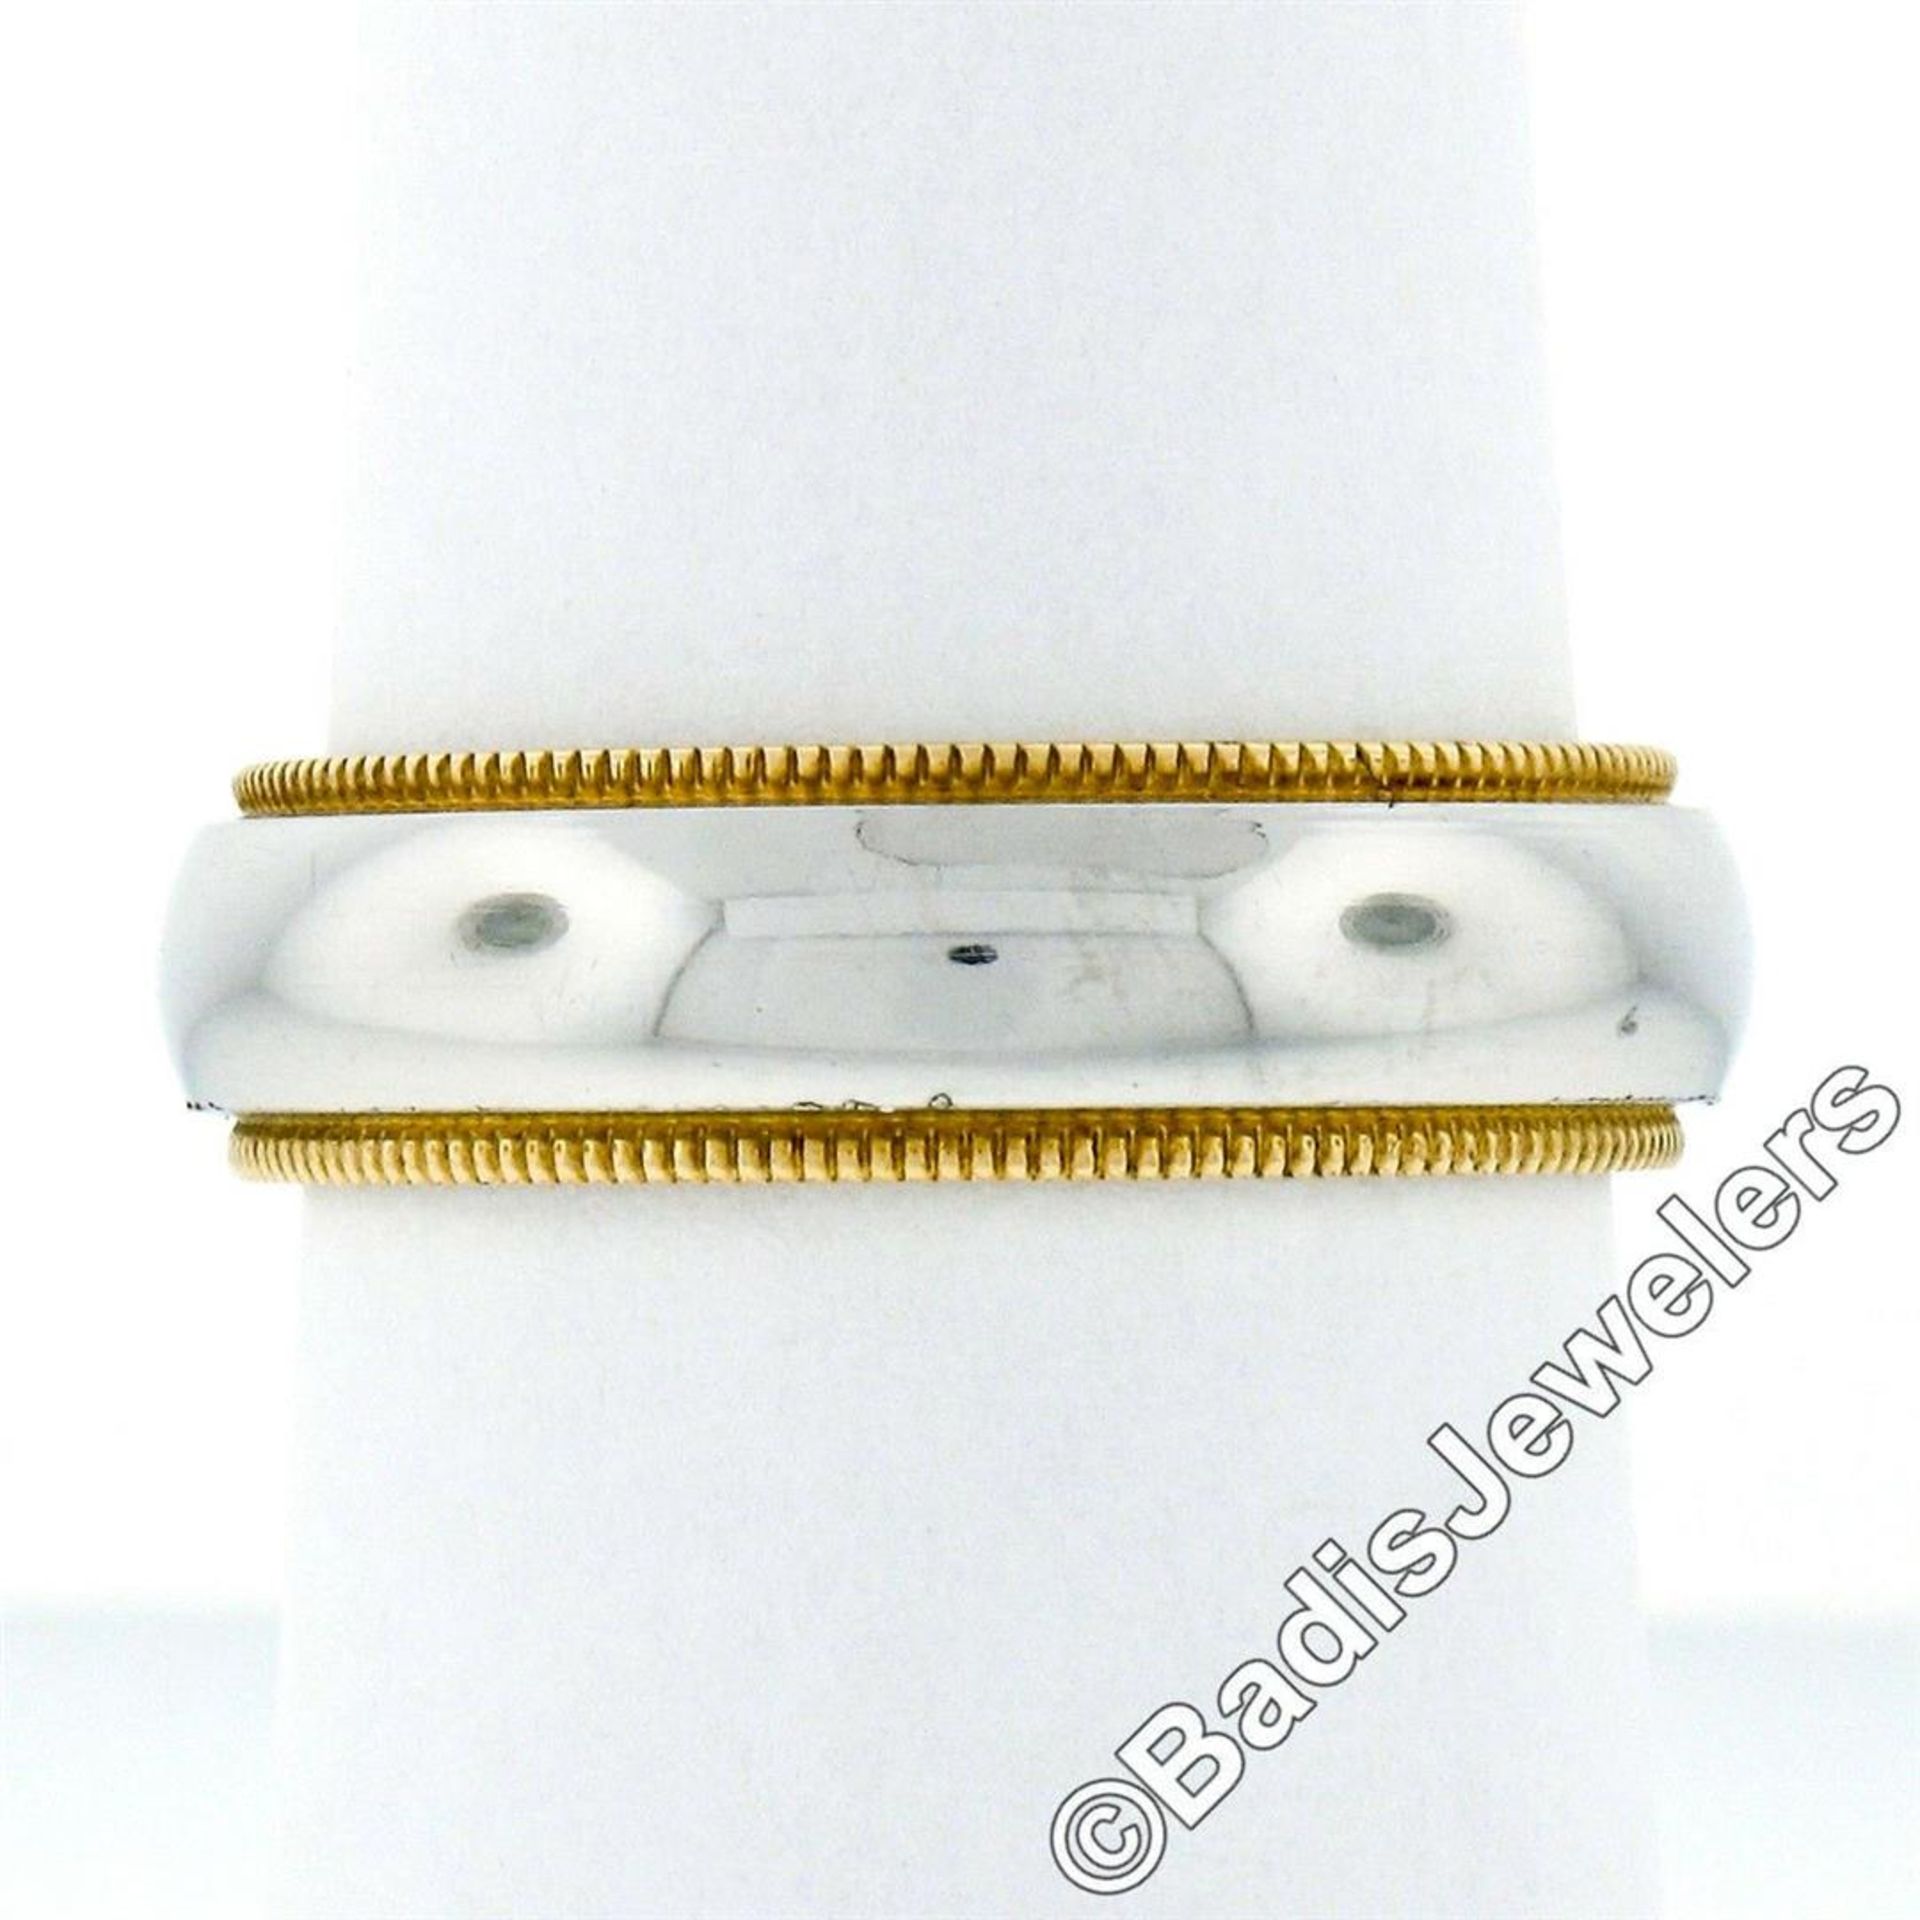 Men's 18kt White and Yellow Gold 5.5mm Milgrain Edged Band Ring - Image 4 of 7